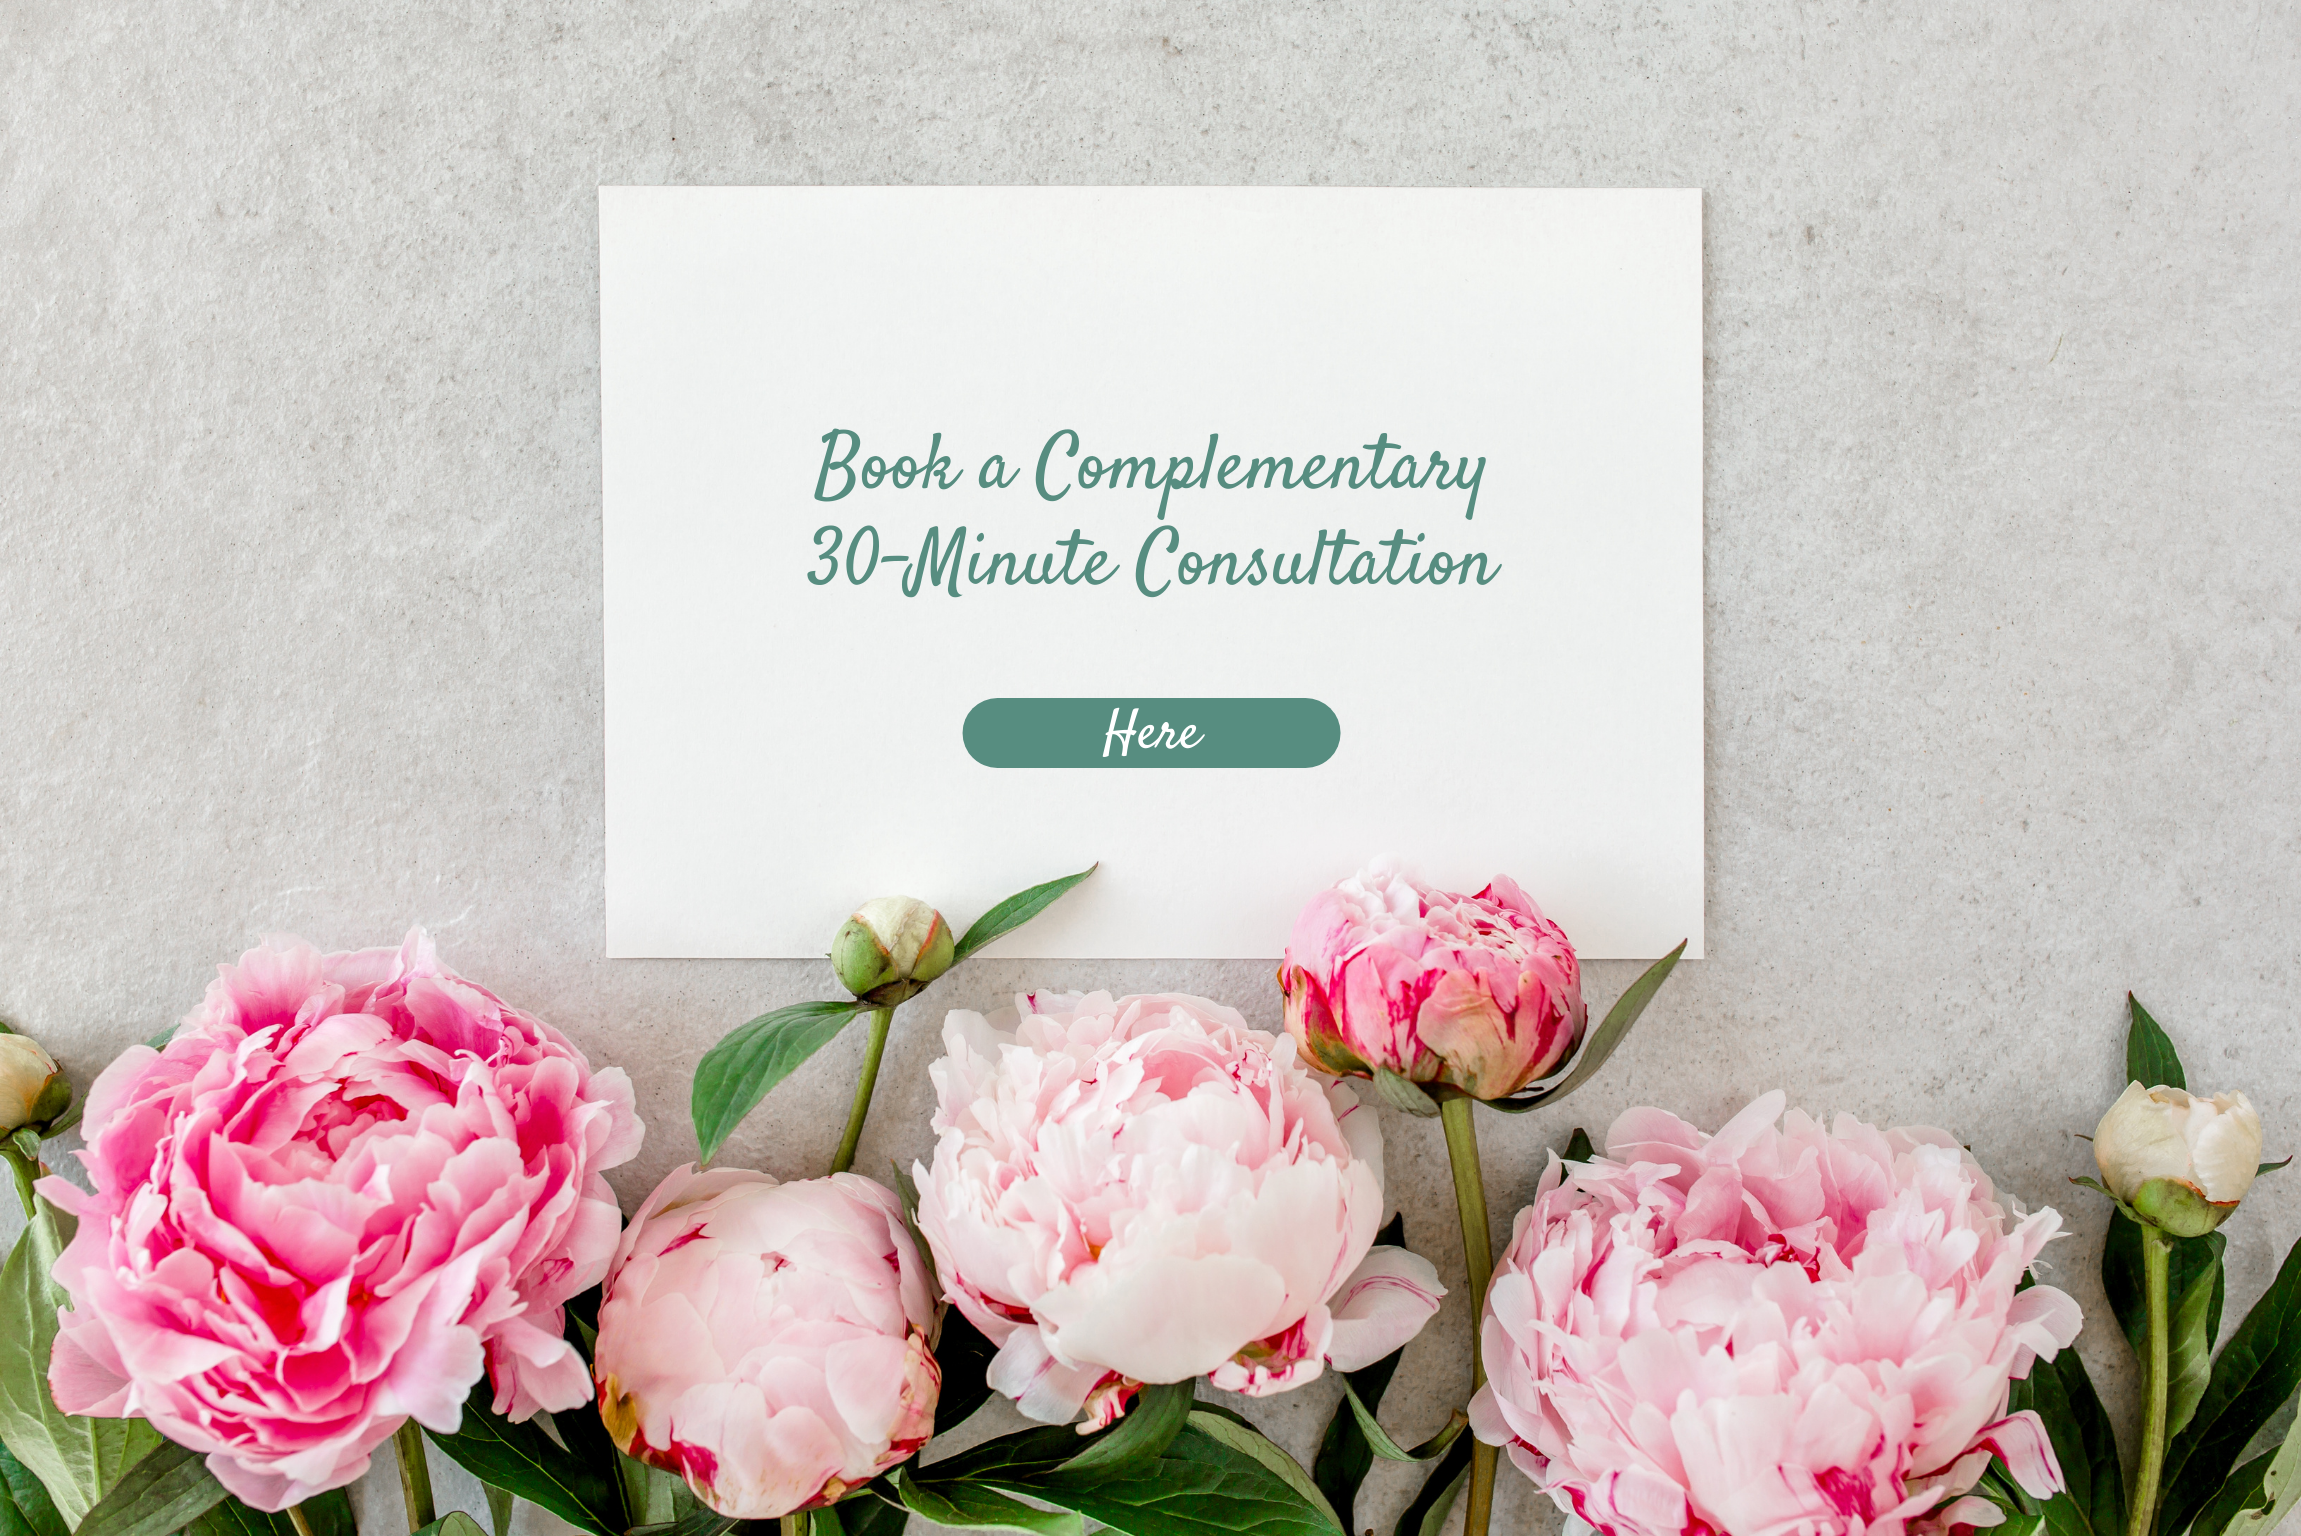 Book a Complimentary 30-Minute Consultation